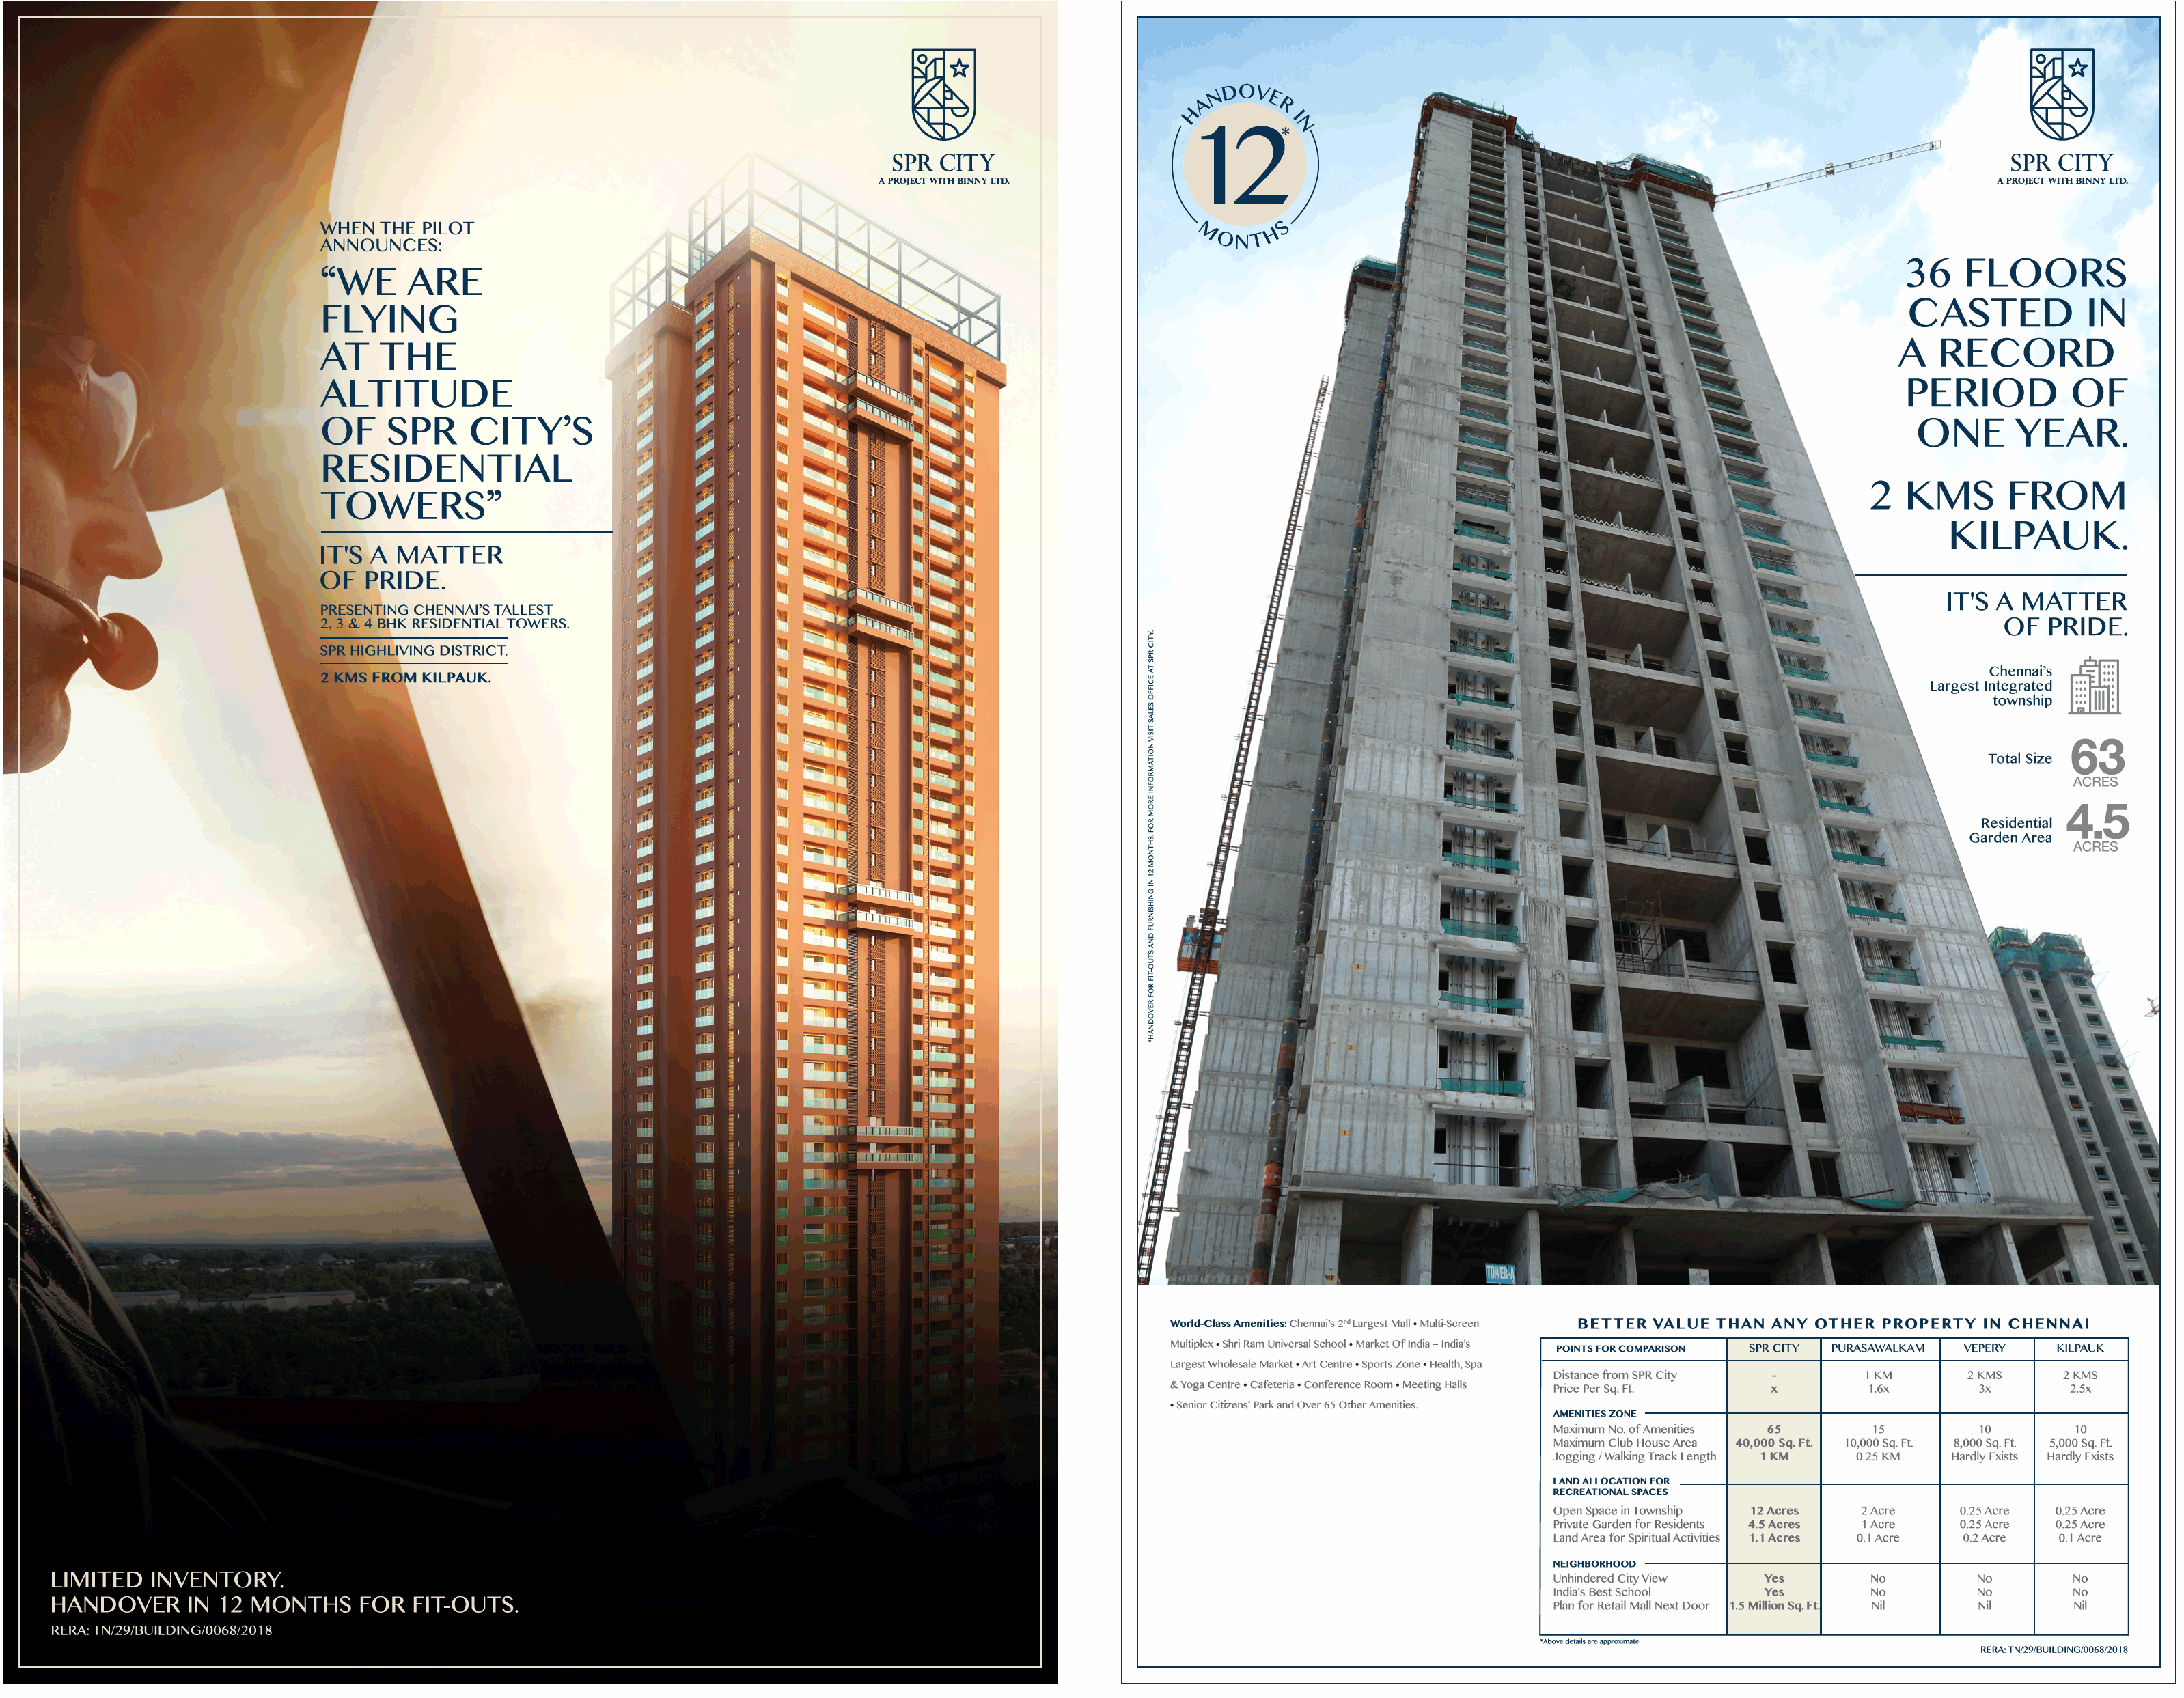 Presenting Chennai's Tallest 2, 3, 4 BHK Residential Towers at SPR City Highliving District Update